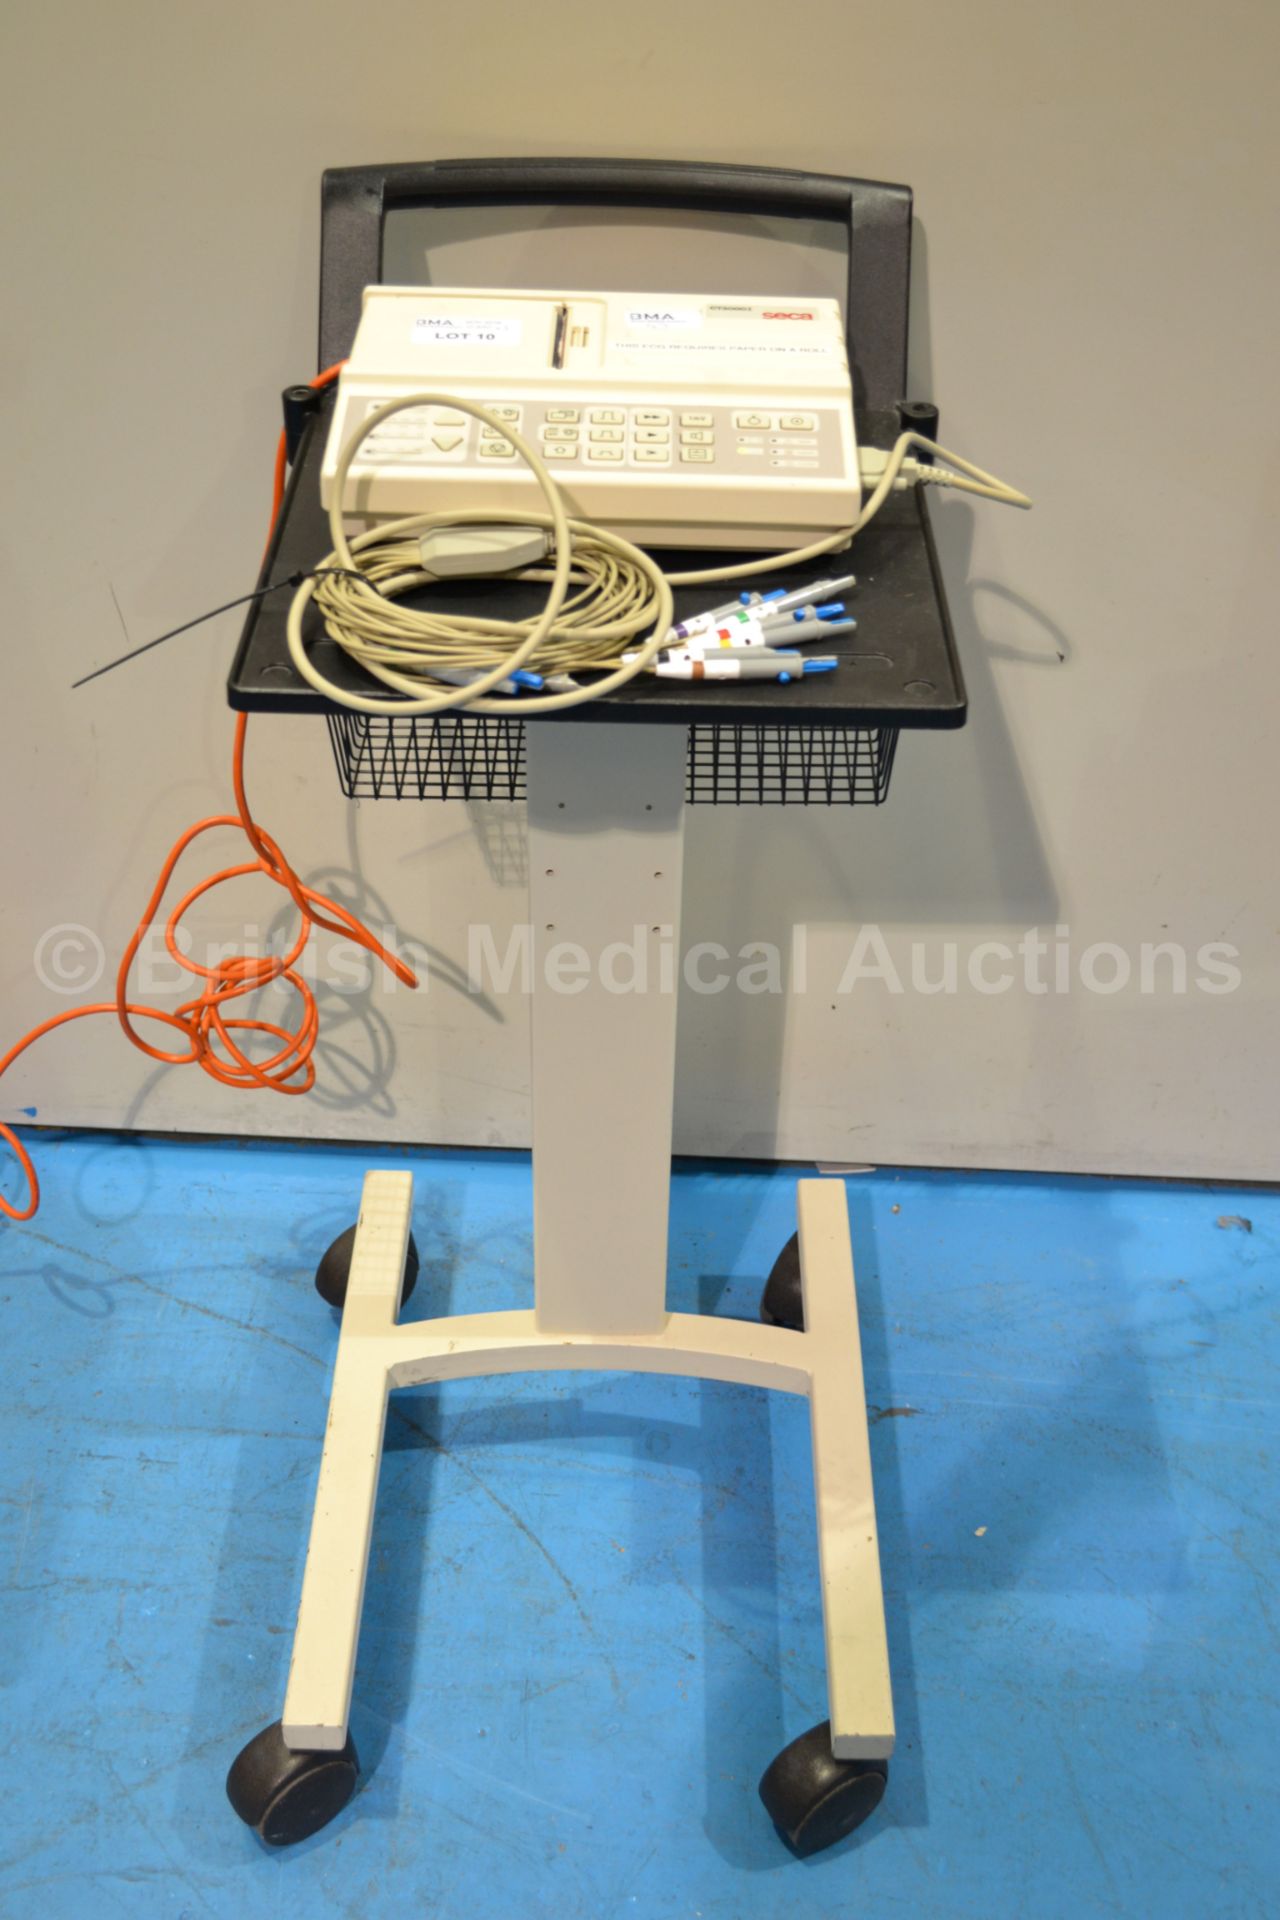 Seca CT3000I ECG Machine on Trolley with ECG Leads - Image 3 of 4